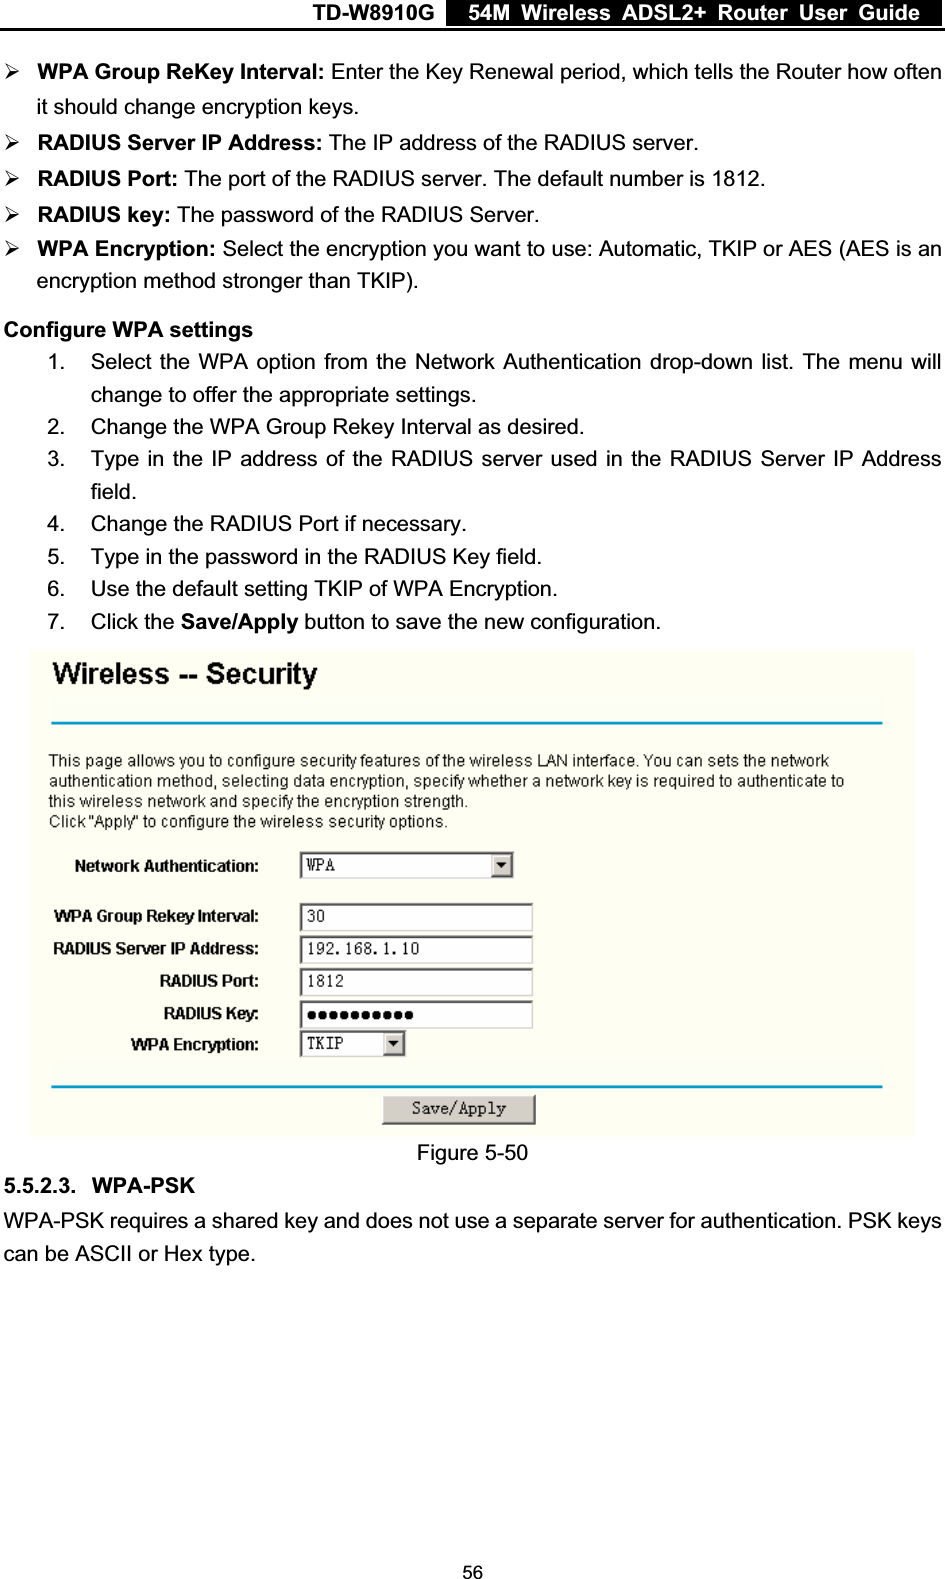 TD-W8910G    54M Wireless ADSL2+ Router User Guide  ¾WPA Group ReKey Interval: Enter the Key Renewal period, which tells the Router how often it should change encryption keys. ¾RADIUS Server IP Address: The IP address of the RADIUS server. ¾RADIUS Port: The port of the RADIUS server. The default number is 1812. ¾RADIUS key: The password of the RADIUS Server. ¾WPA Encryption: Select the encryption you want to use: Automatic, TKIP or AES (AES is an encryption method stronger than TKIP). Configure WPA settings 1.  Select the WPA option from the Network Authentication drop-down list. The menu will change to offer the appropriate settings. 2.  Change the WPA Group Rekey Interval as desired. 3.  Type in the IP address of the RADIUS server used in the RADIUS Server IP Address field.4.  Change the RADIUS Port if necessary. 5.  Type in the password in the RADIUS Key field. 6.  Use the default setting TKIP of WPA Encryption. 7. Click the Save/Apply button to save the new configuration. Figure 5-50 5.5.2.3. WPA-PSKWPA-PSK requires a shared key and does not use a separate server for authentication. PSK keys can be ASCII or Hex type.  56